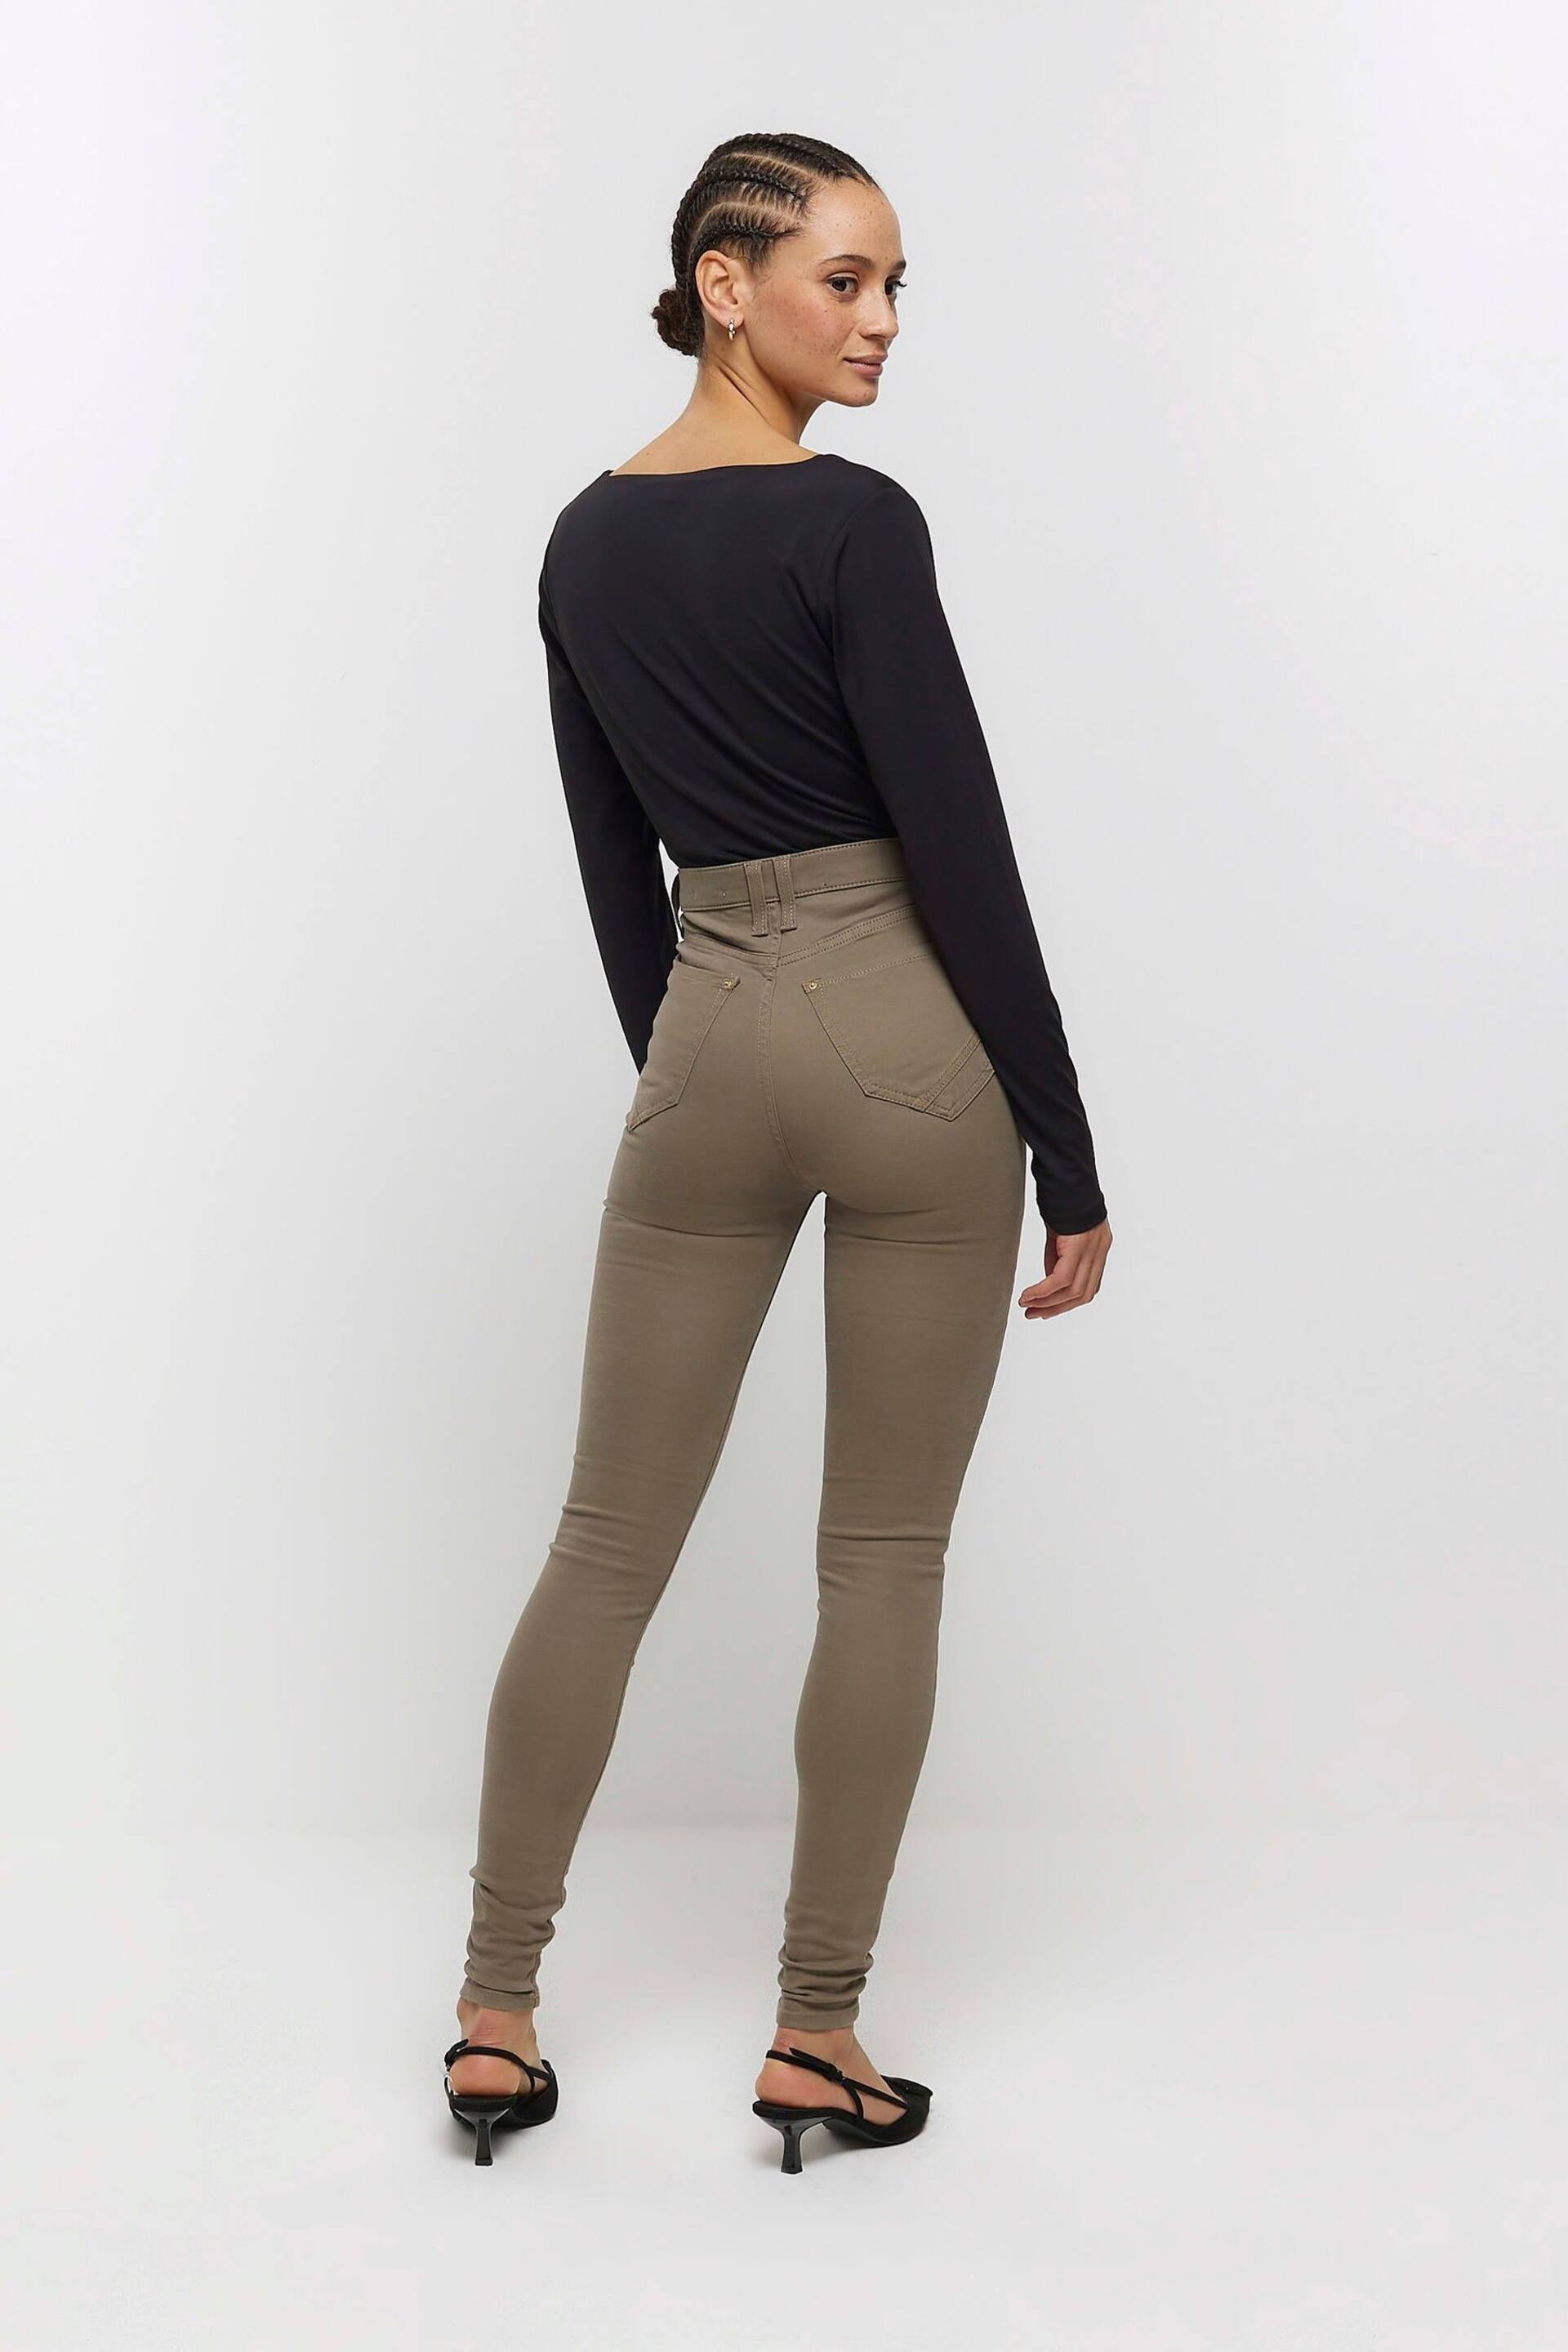 River Island Green High Rise Skinny carpenter Jeans - Image 2 of 7